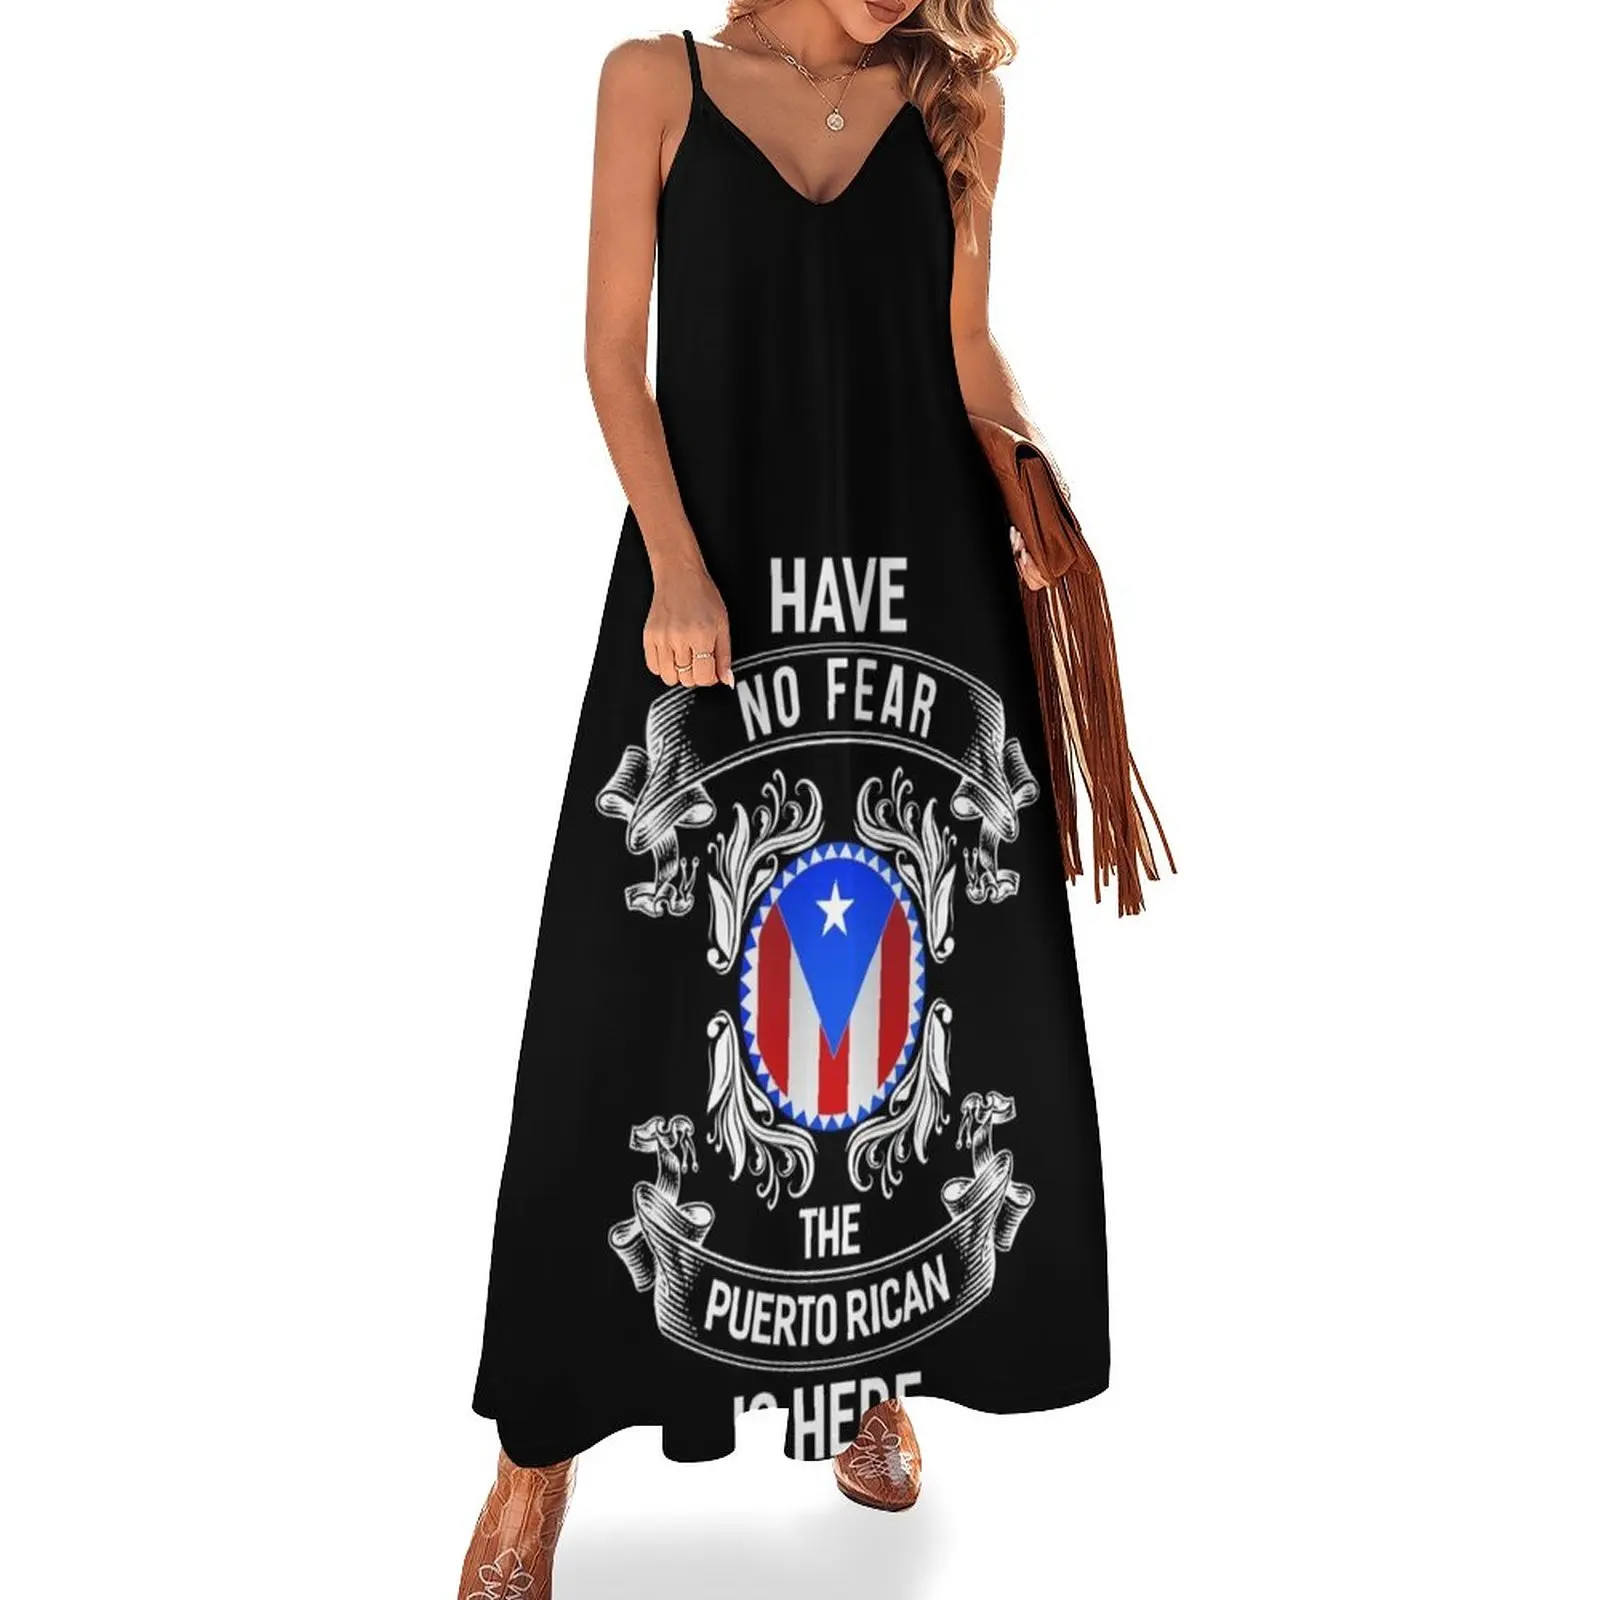 New Have No Fear The Puerto Rican Is Here, Puerto Rico Pride Party Sleeveless Dress Bride dresses elegant dress